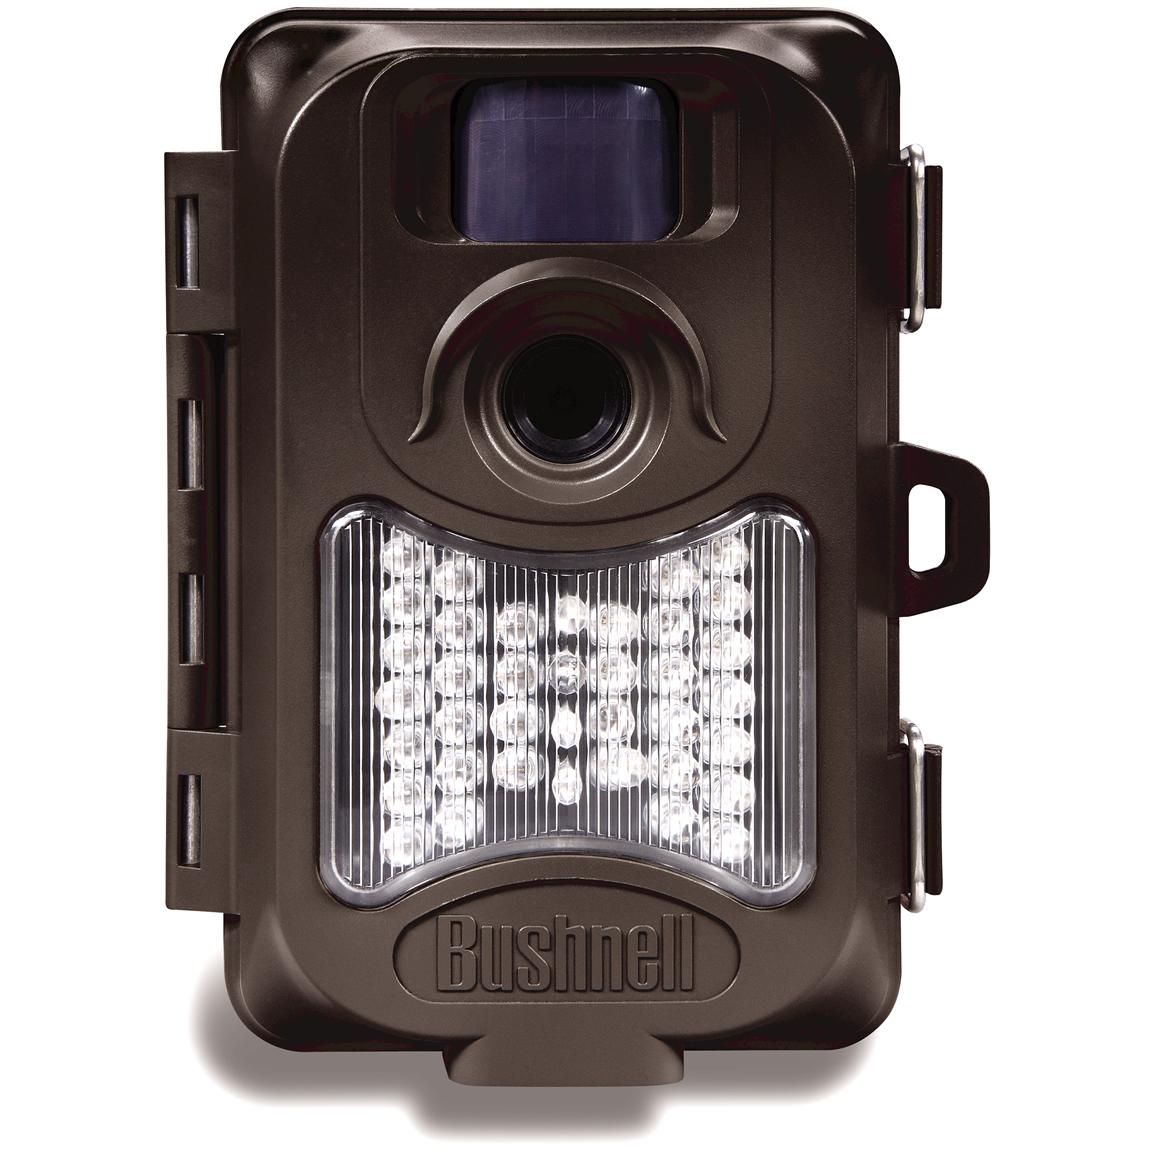 Bushnell X 8 Trail Cam 294837 Game Trail Cameras At Sportsman s Guide